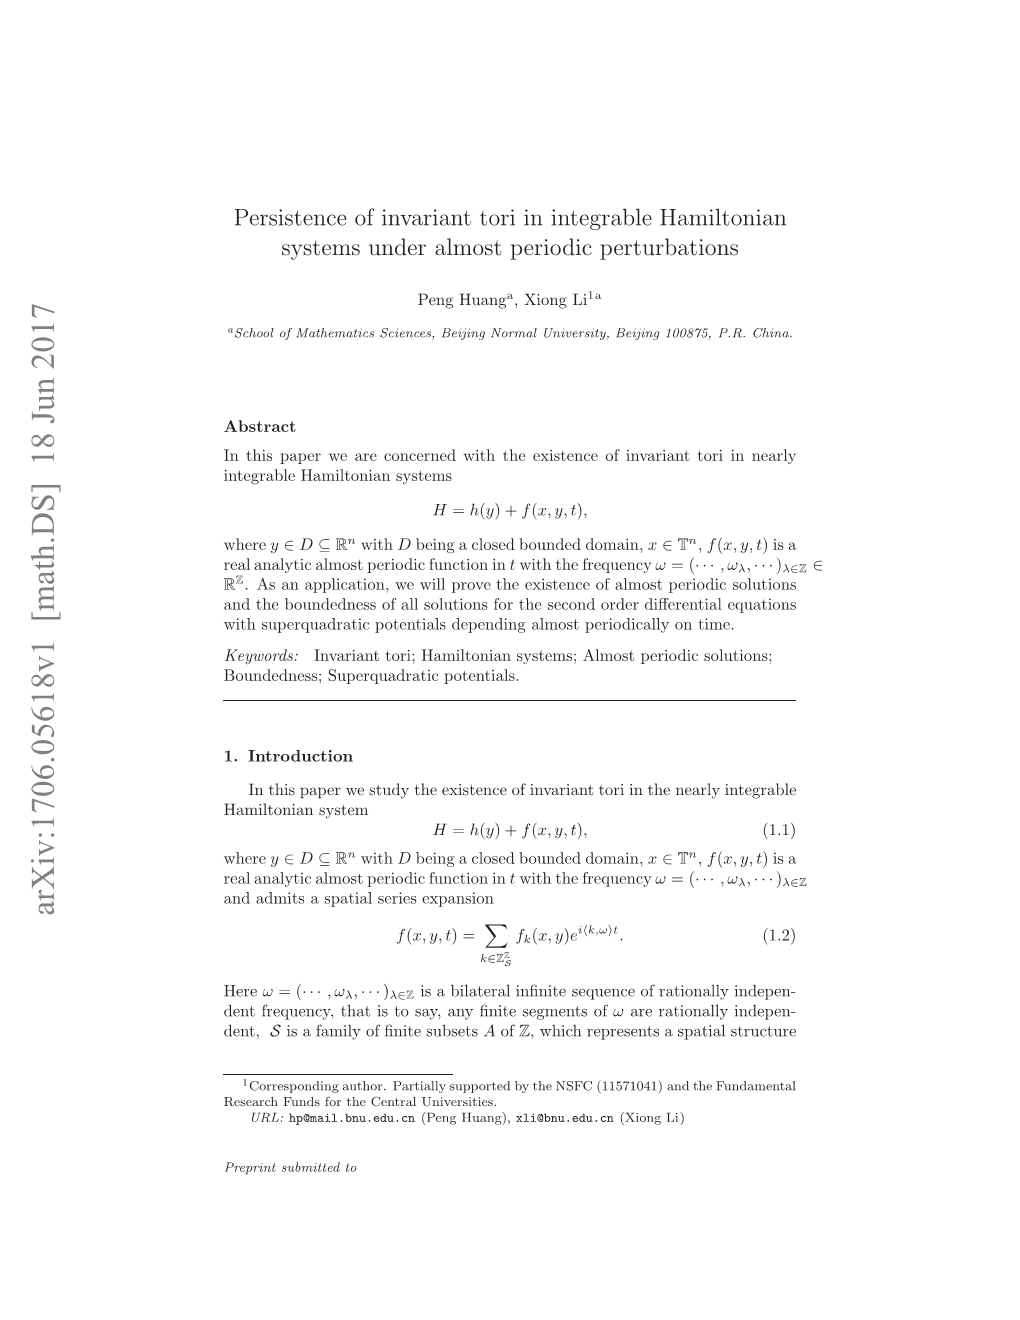 Persistence of Invariant Tori in Integrable Hamiltonian Systems